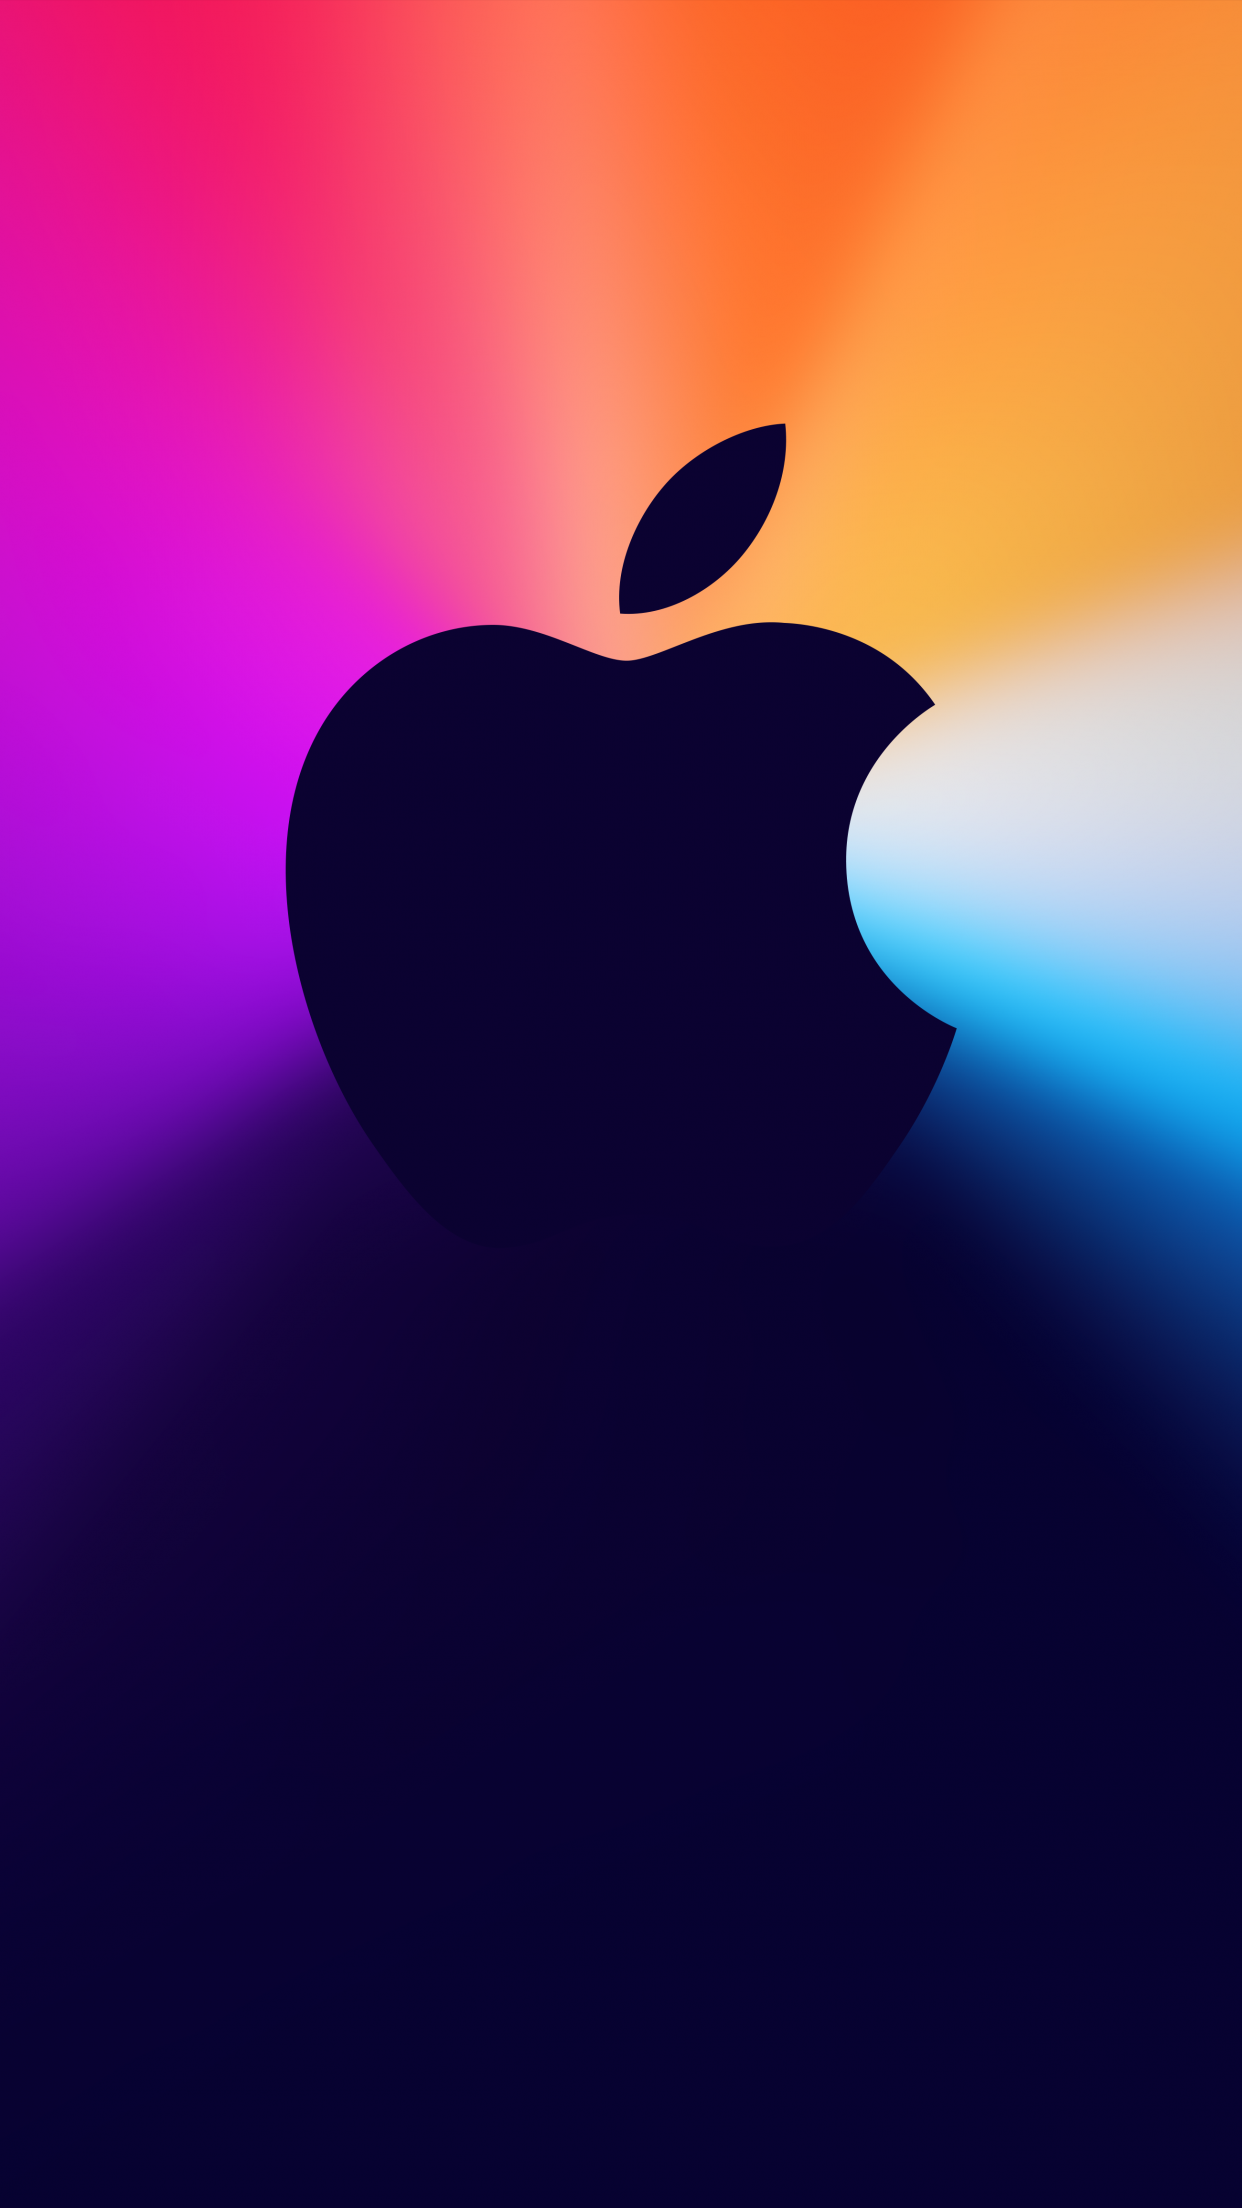 One more thing Wallpaper 4K, Apple logo, Gradient background, Apple Event, Technology